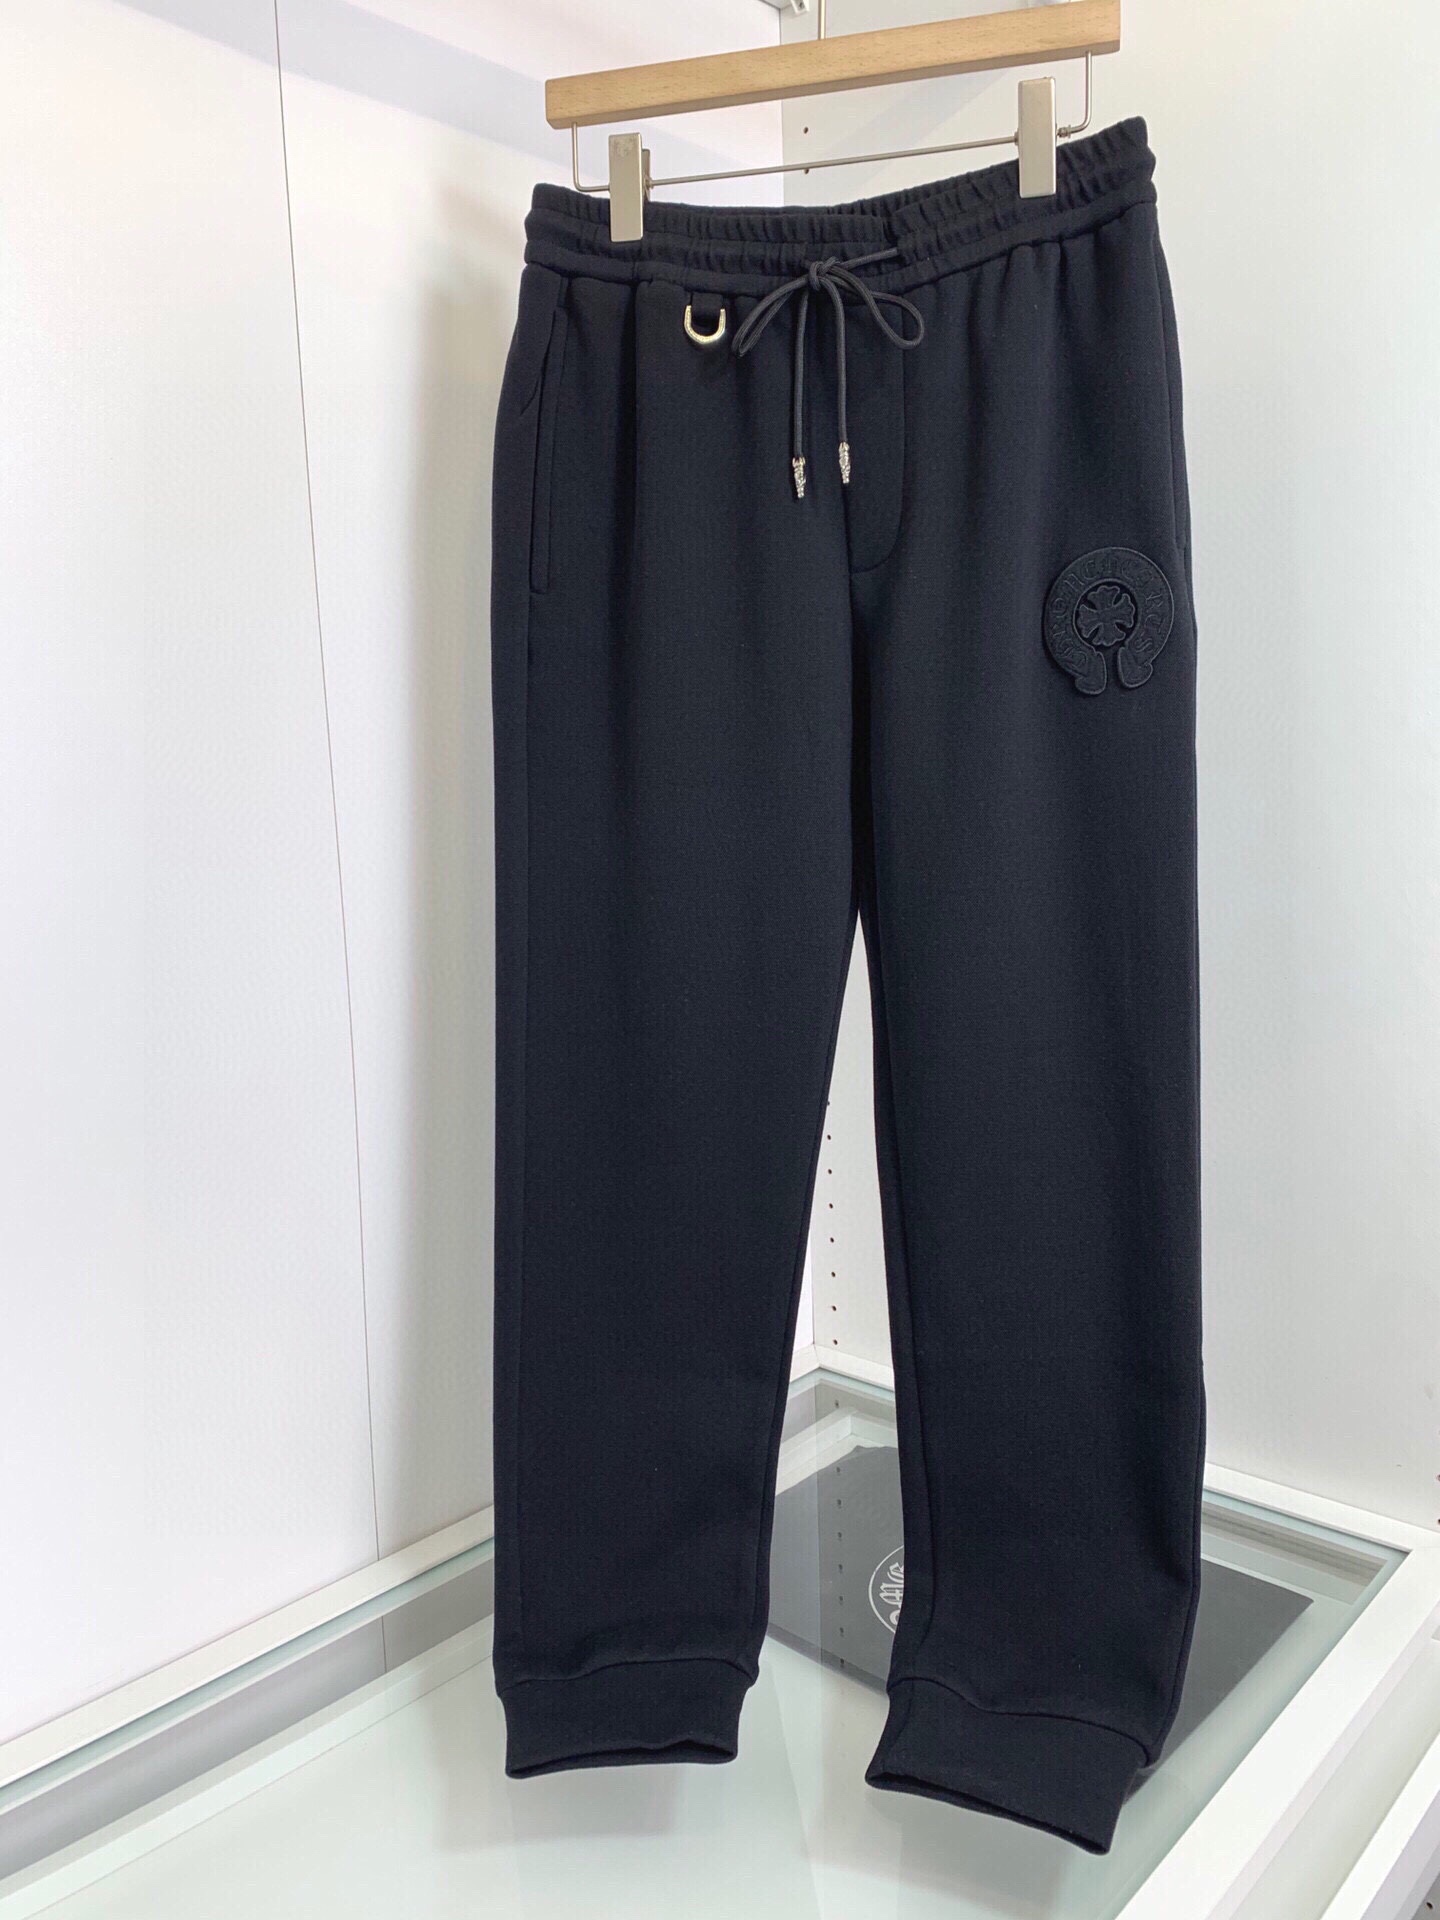 Chrome Hearts Clothing Pants & Trousers Black Grey Embroidery Fall/Winter Collection Fashion Hooded Top